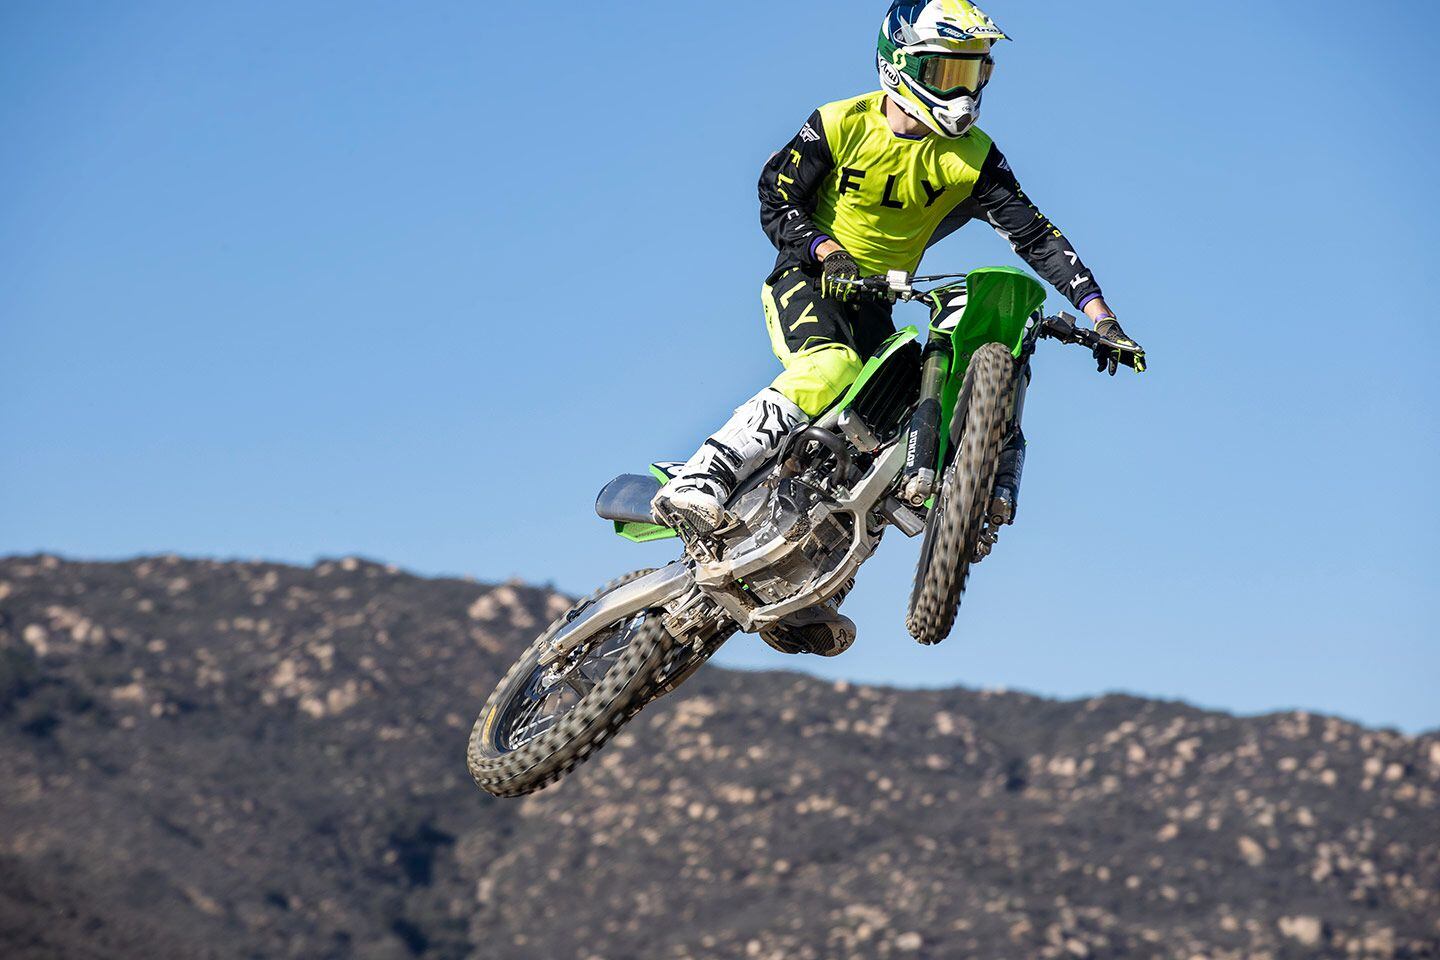 “I love the simplicity of the KYB 48mm coil-spring fork design and wish it came on the KX450 as well, same settings and everything.” <i>—Casey Casper</i>